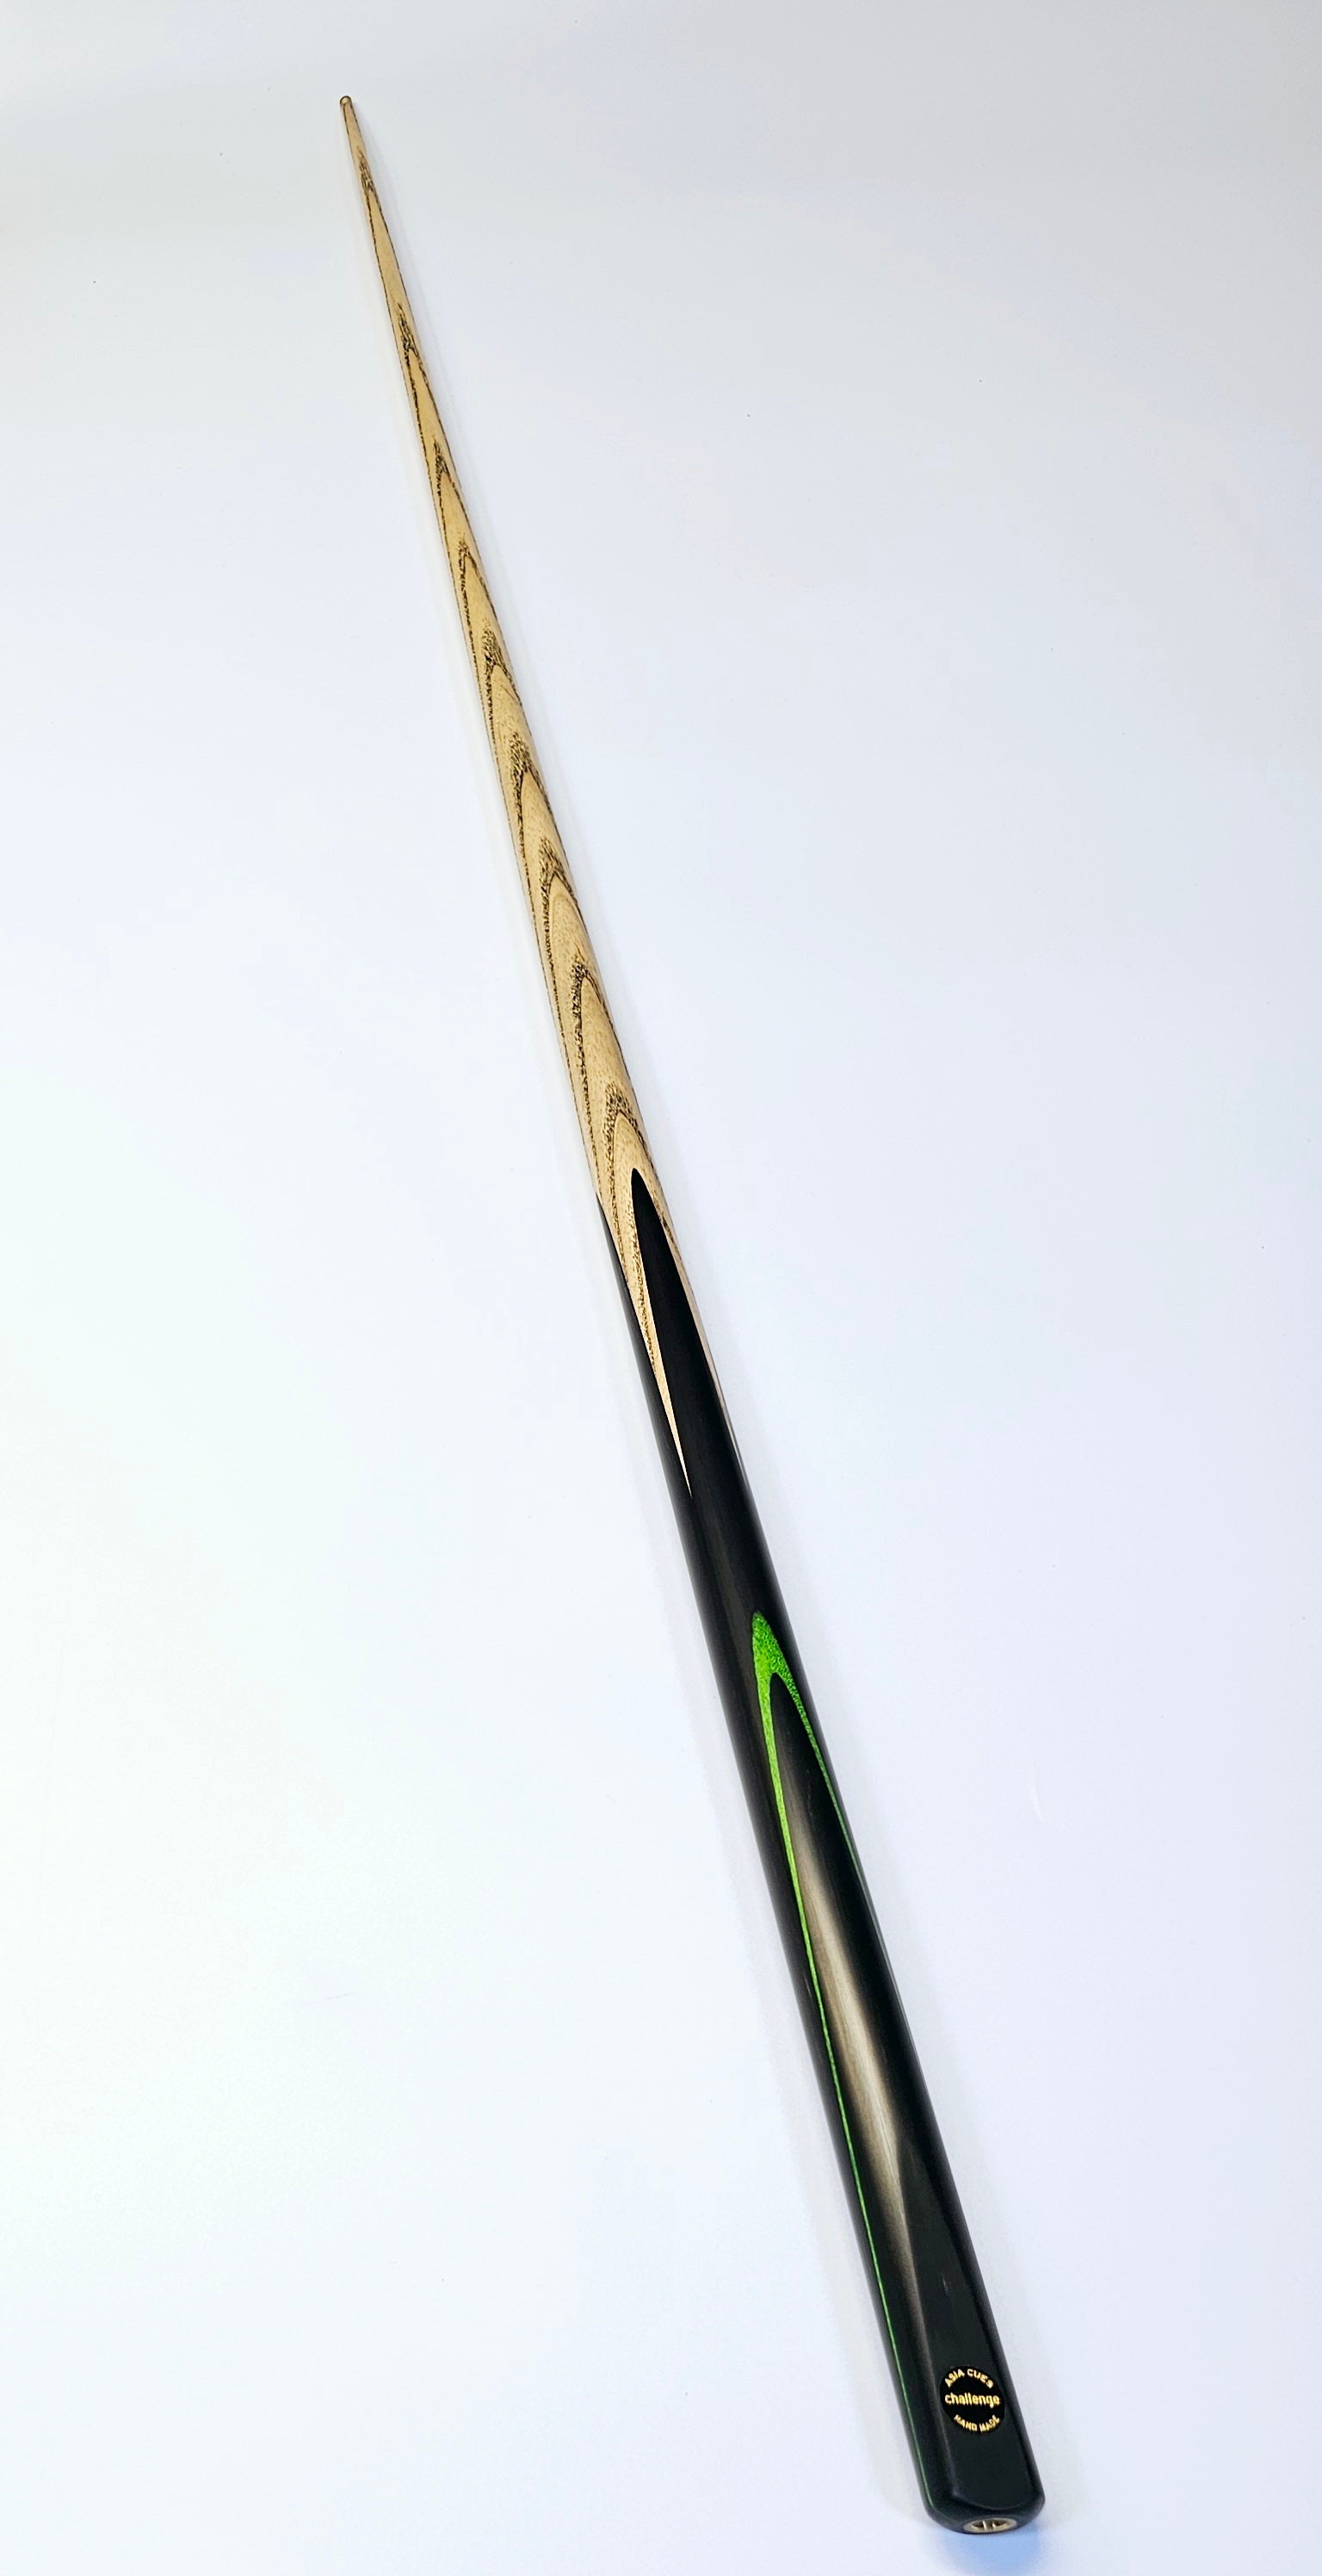 Asia Cues Challenge - One Piece Pool Cue 8.6mm Tip, 17.8oz, 58"